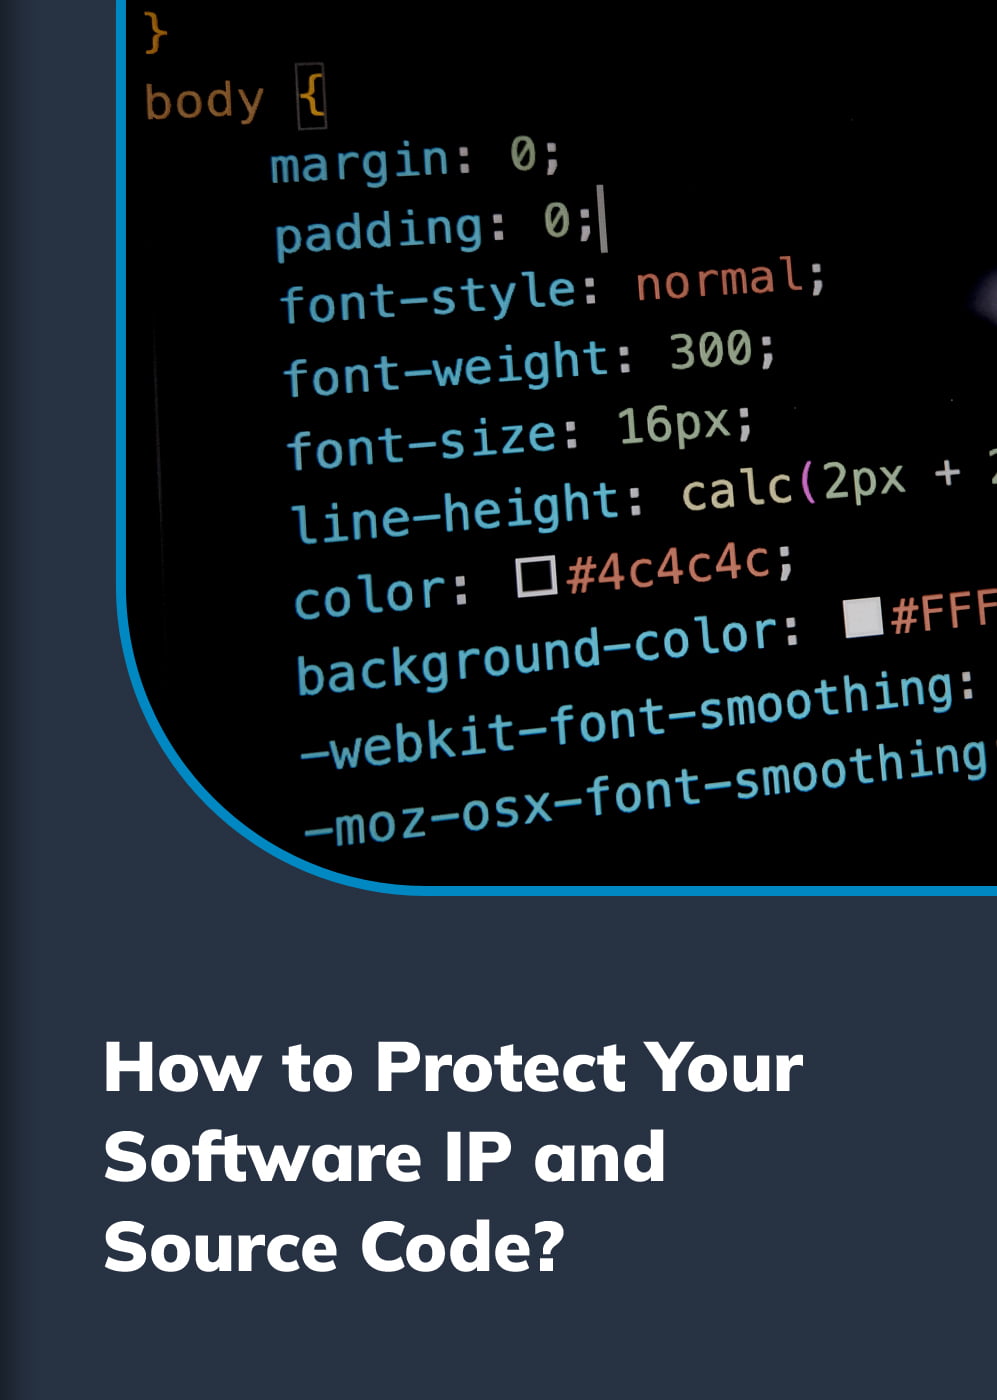 How-to-Protect-Your-Software-IP-and-Source-Code